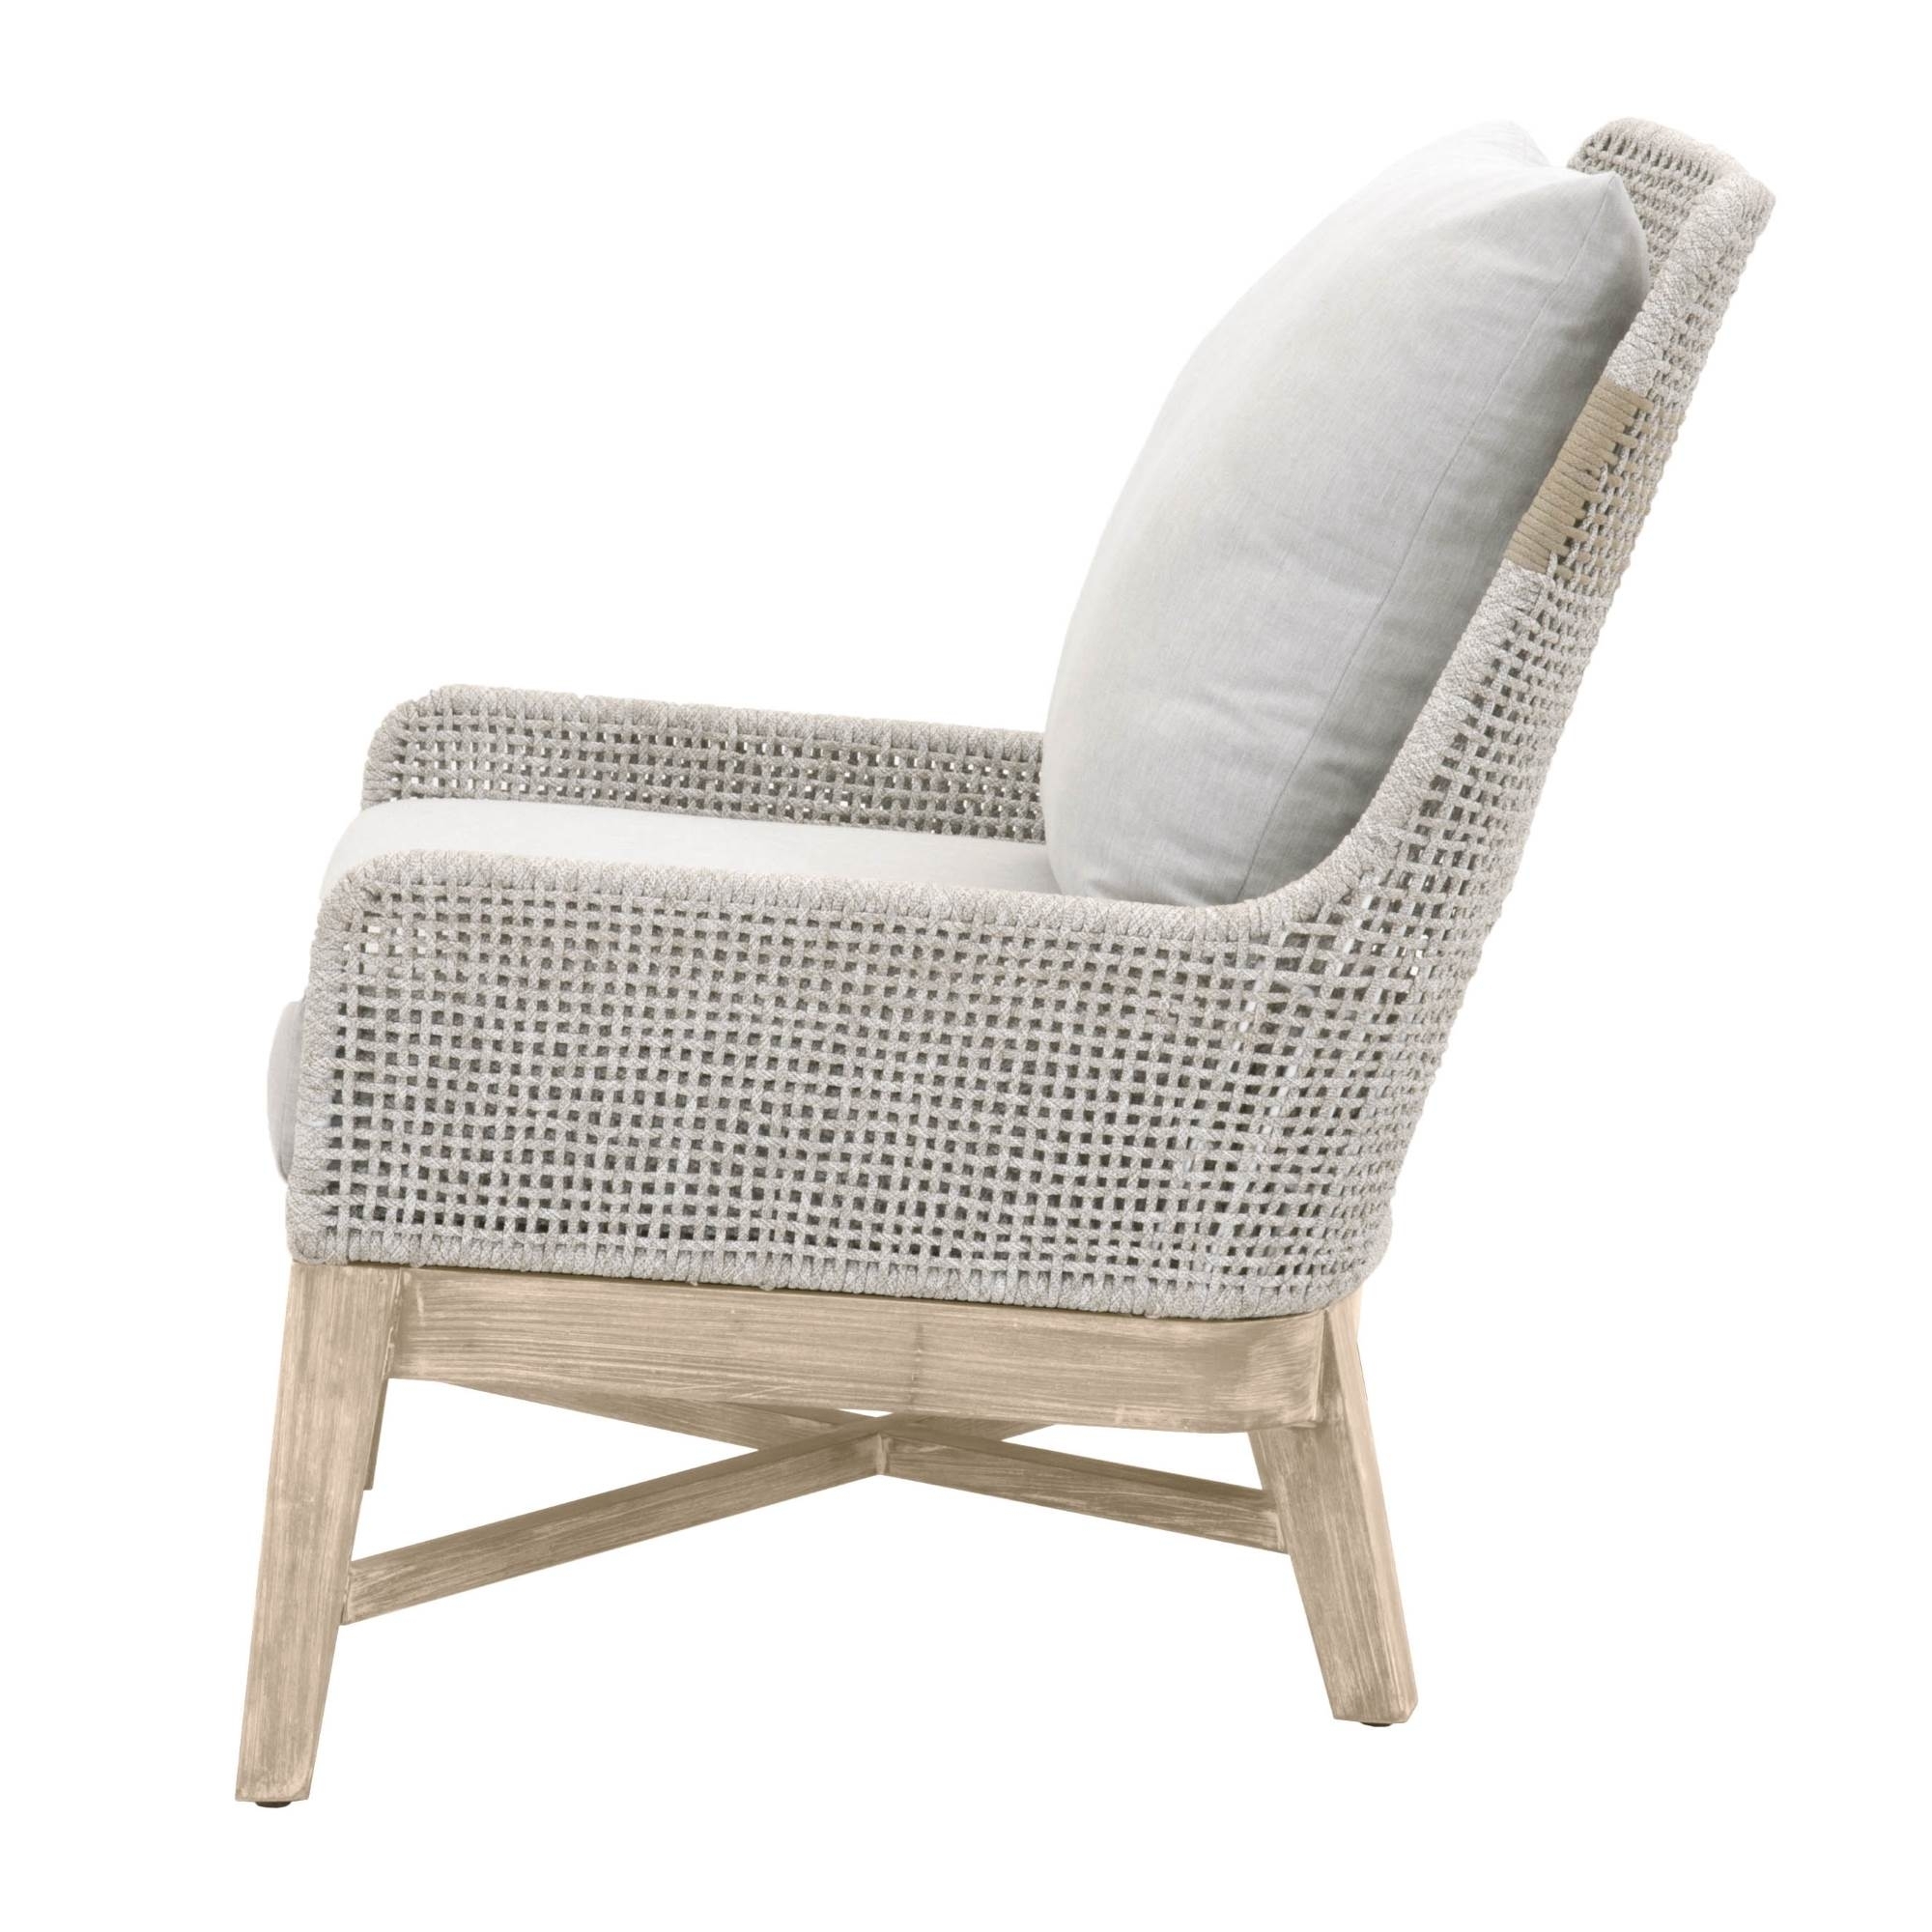 Panorama Indoor/Outdoor Club Chair, White Taupe - Image 2